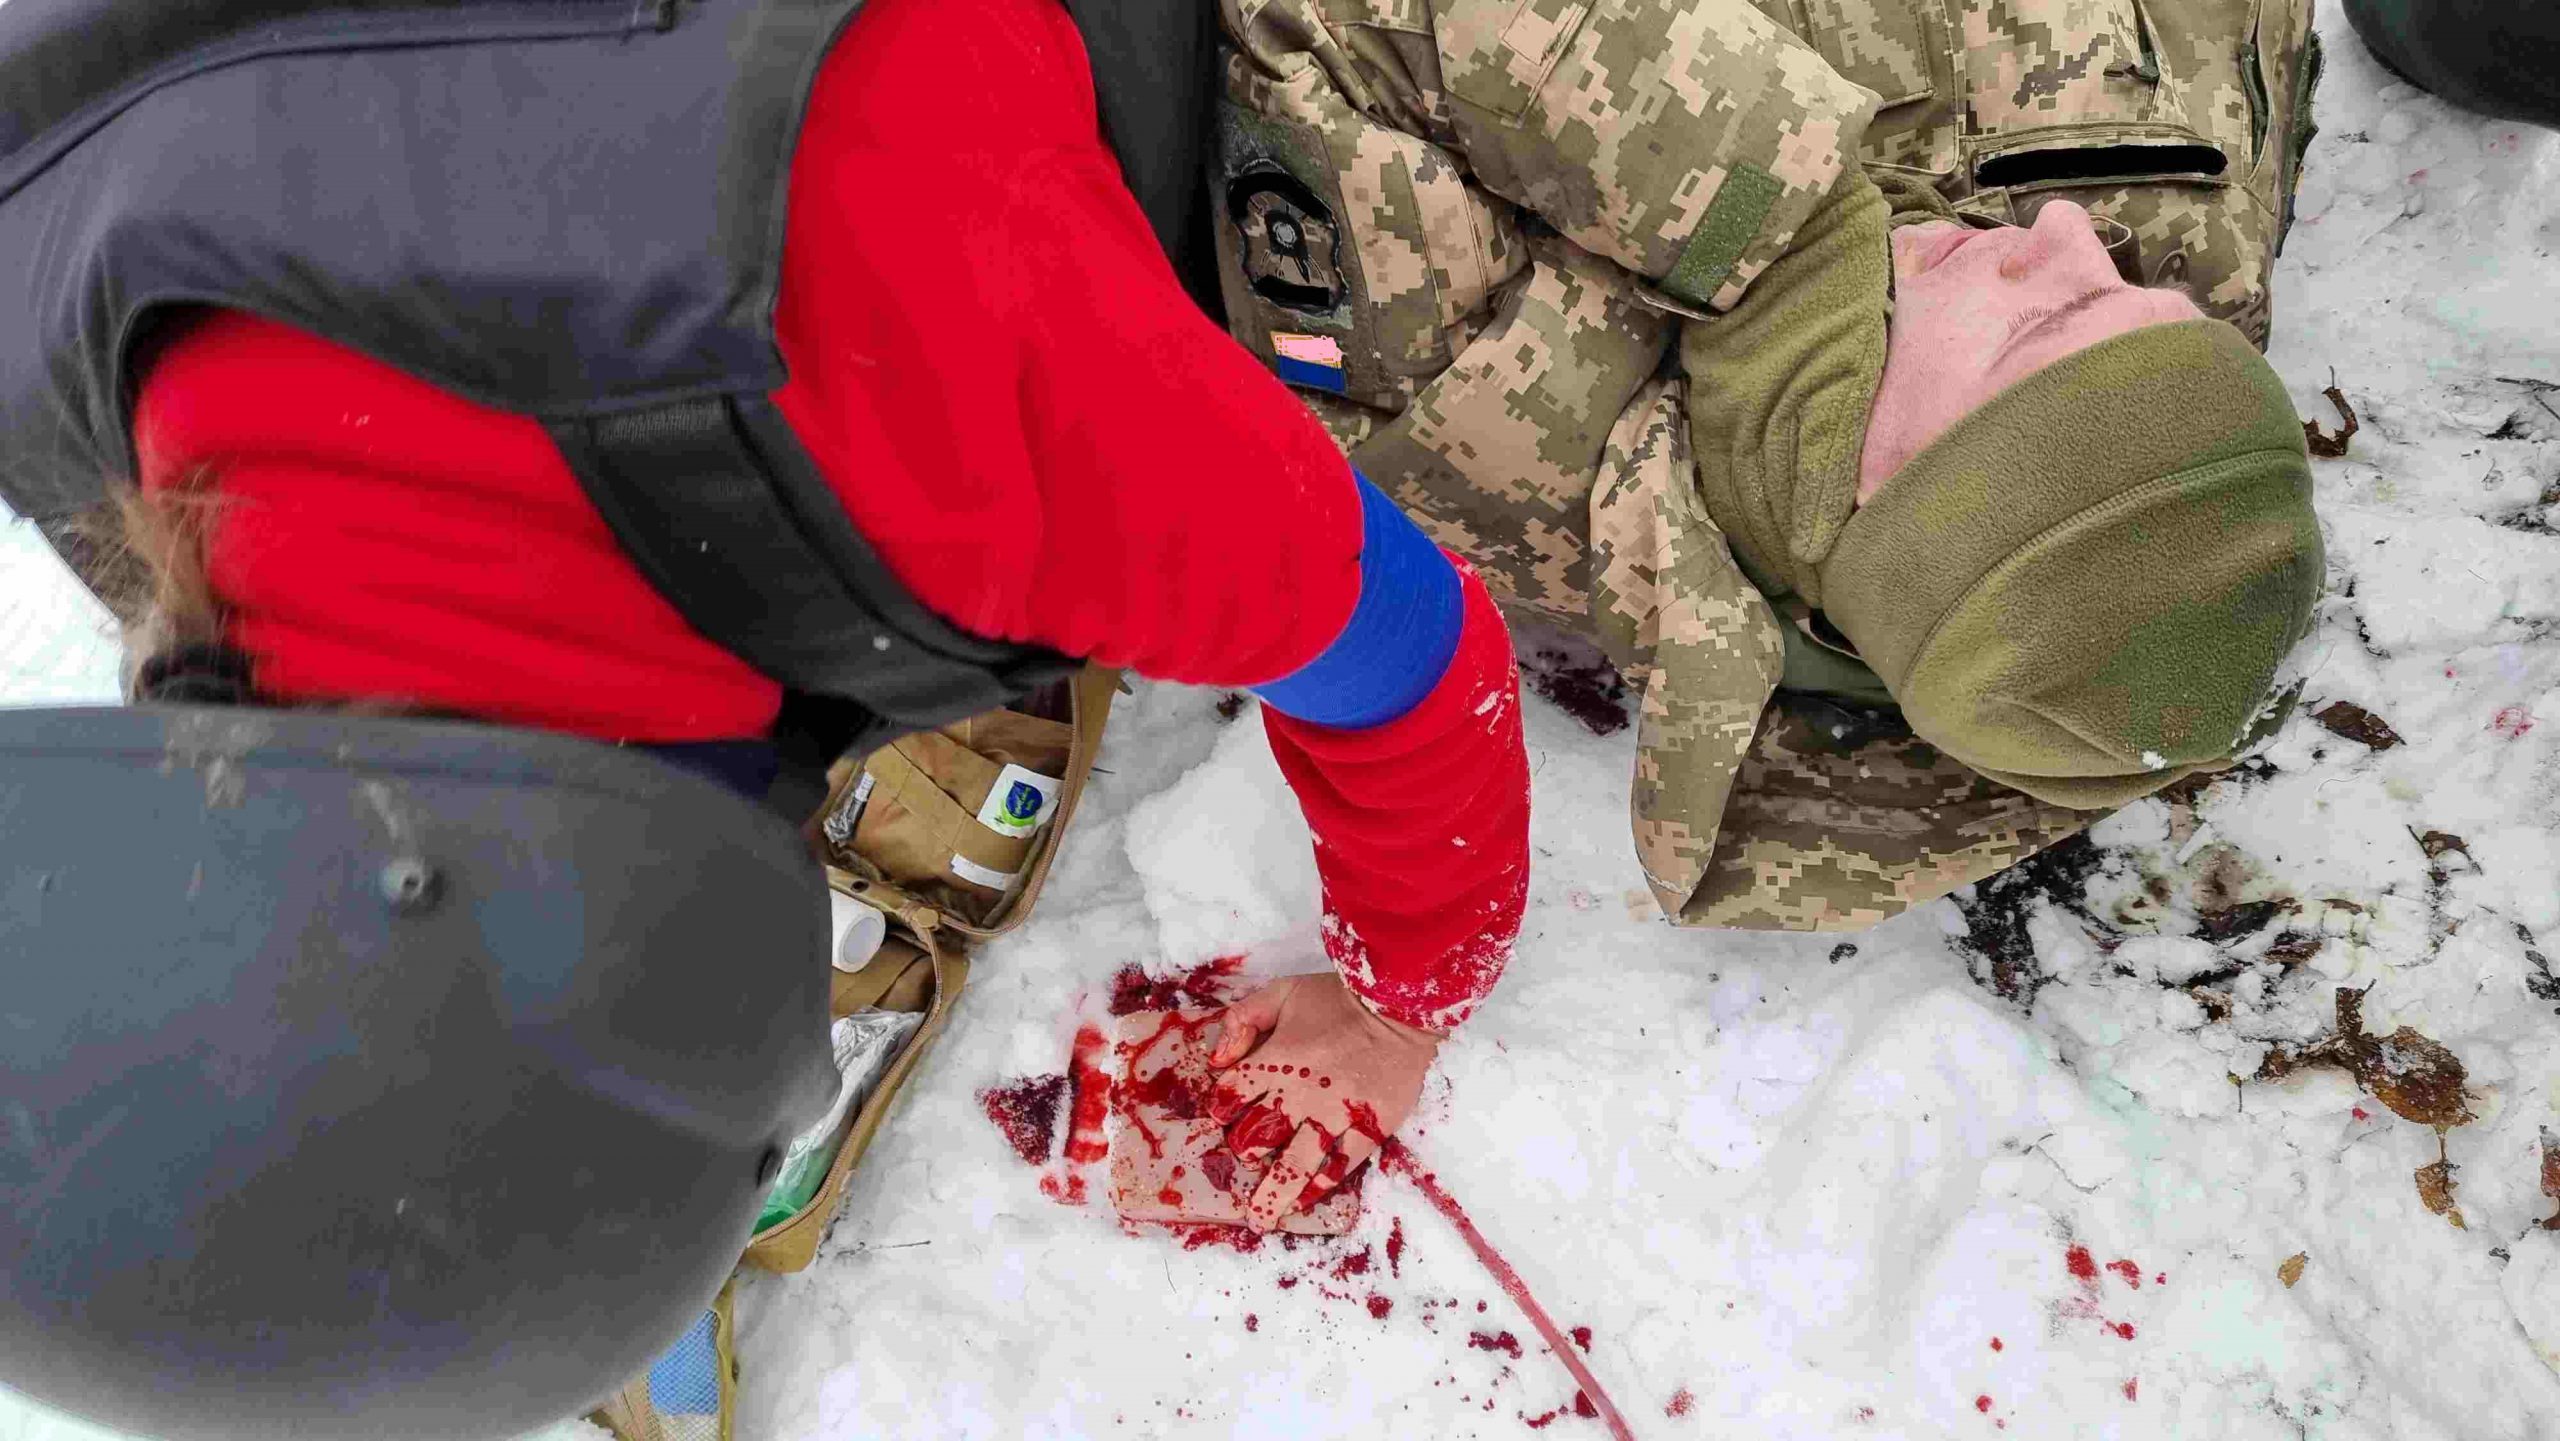 Tactical First Aid in Hostile Environments (PSTMH)